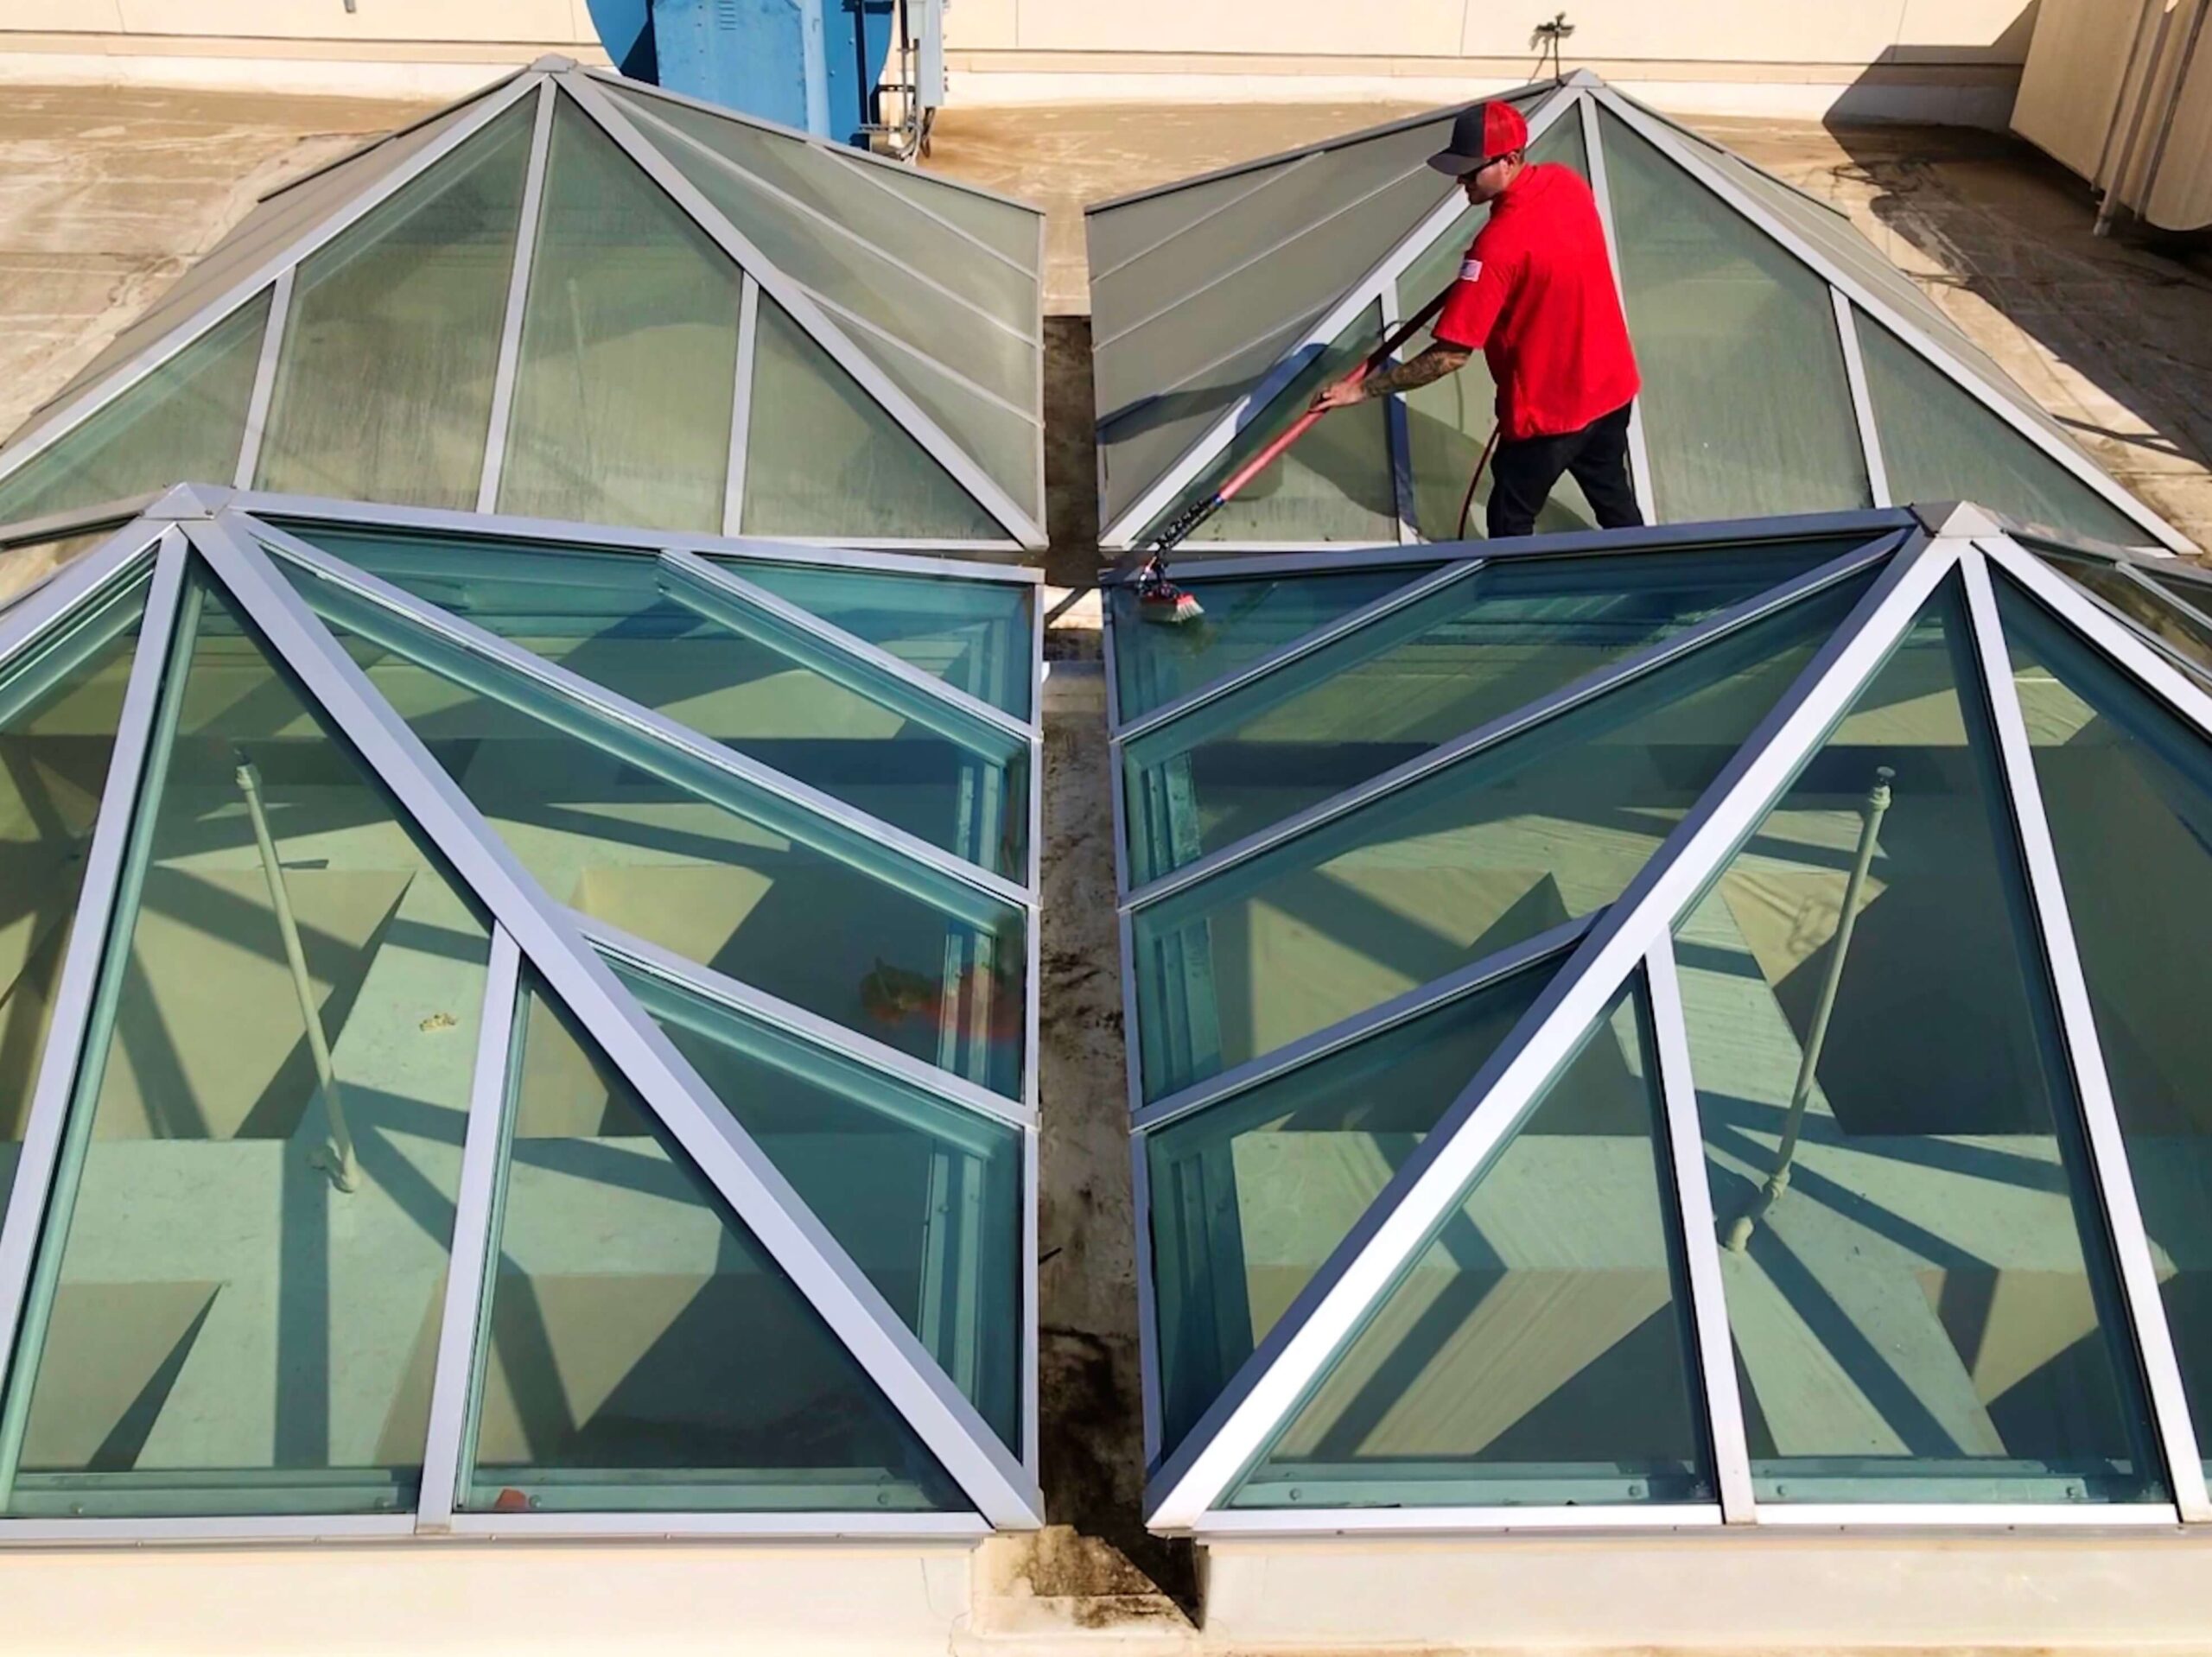 A skilled worker cleaning the windows of a commercial building